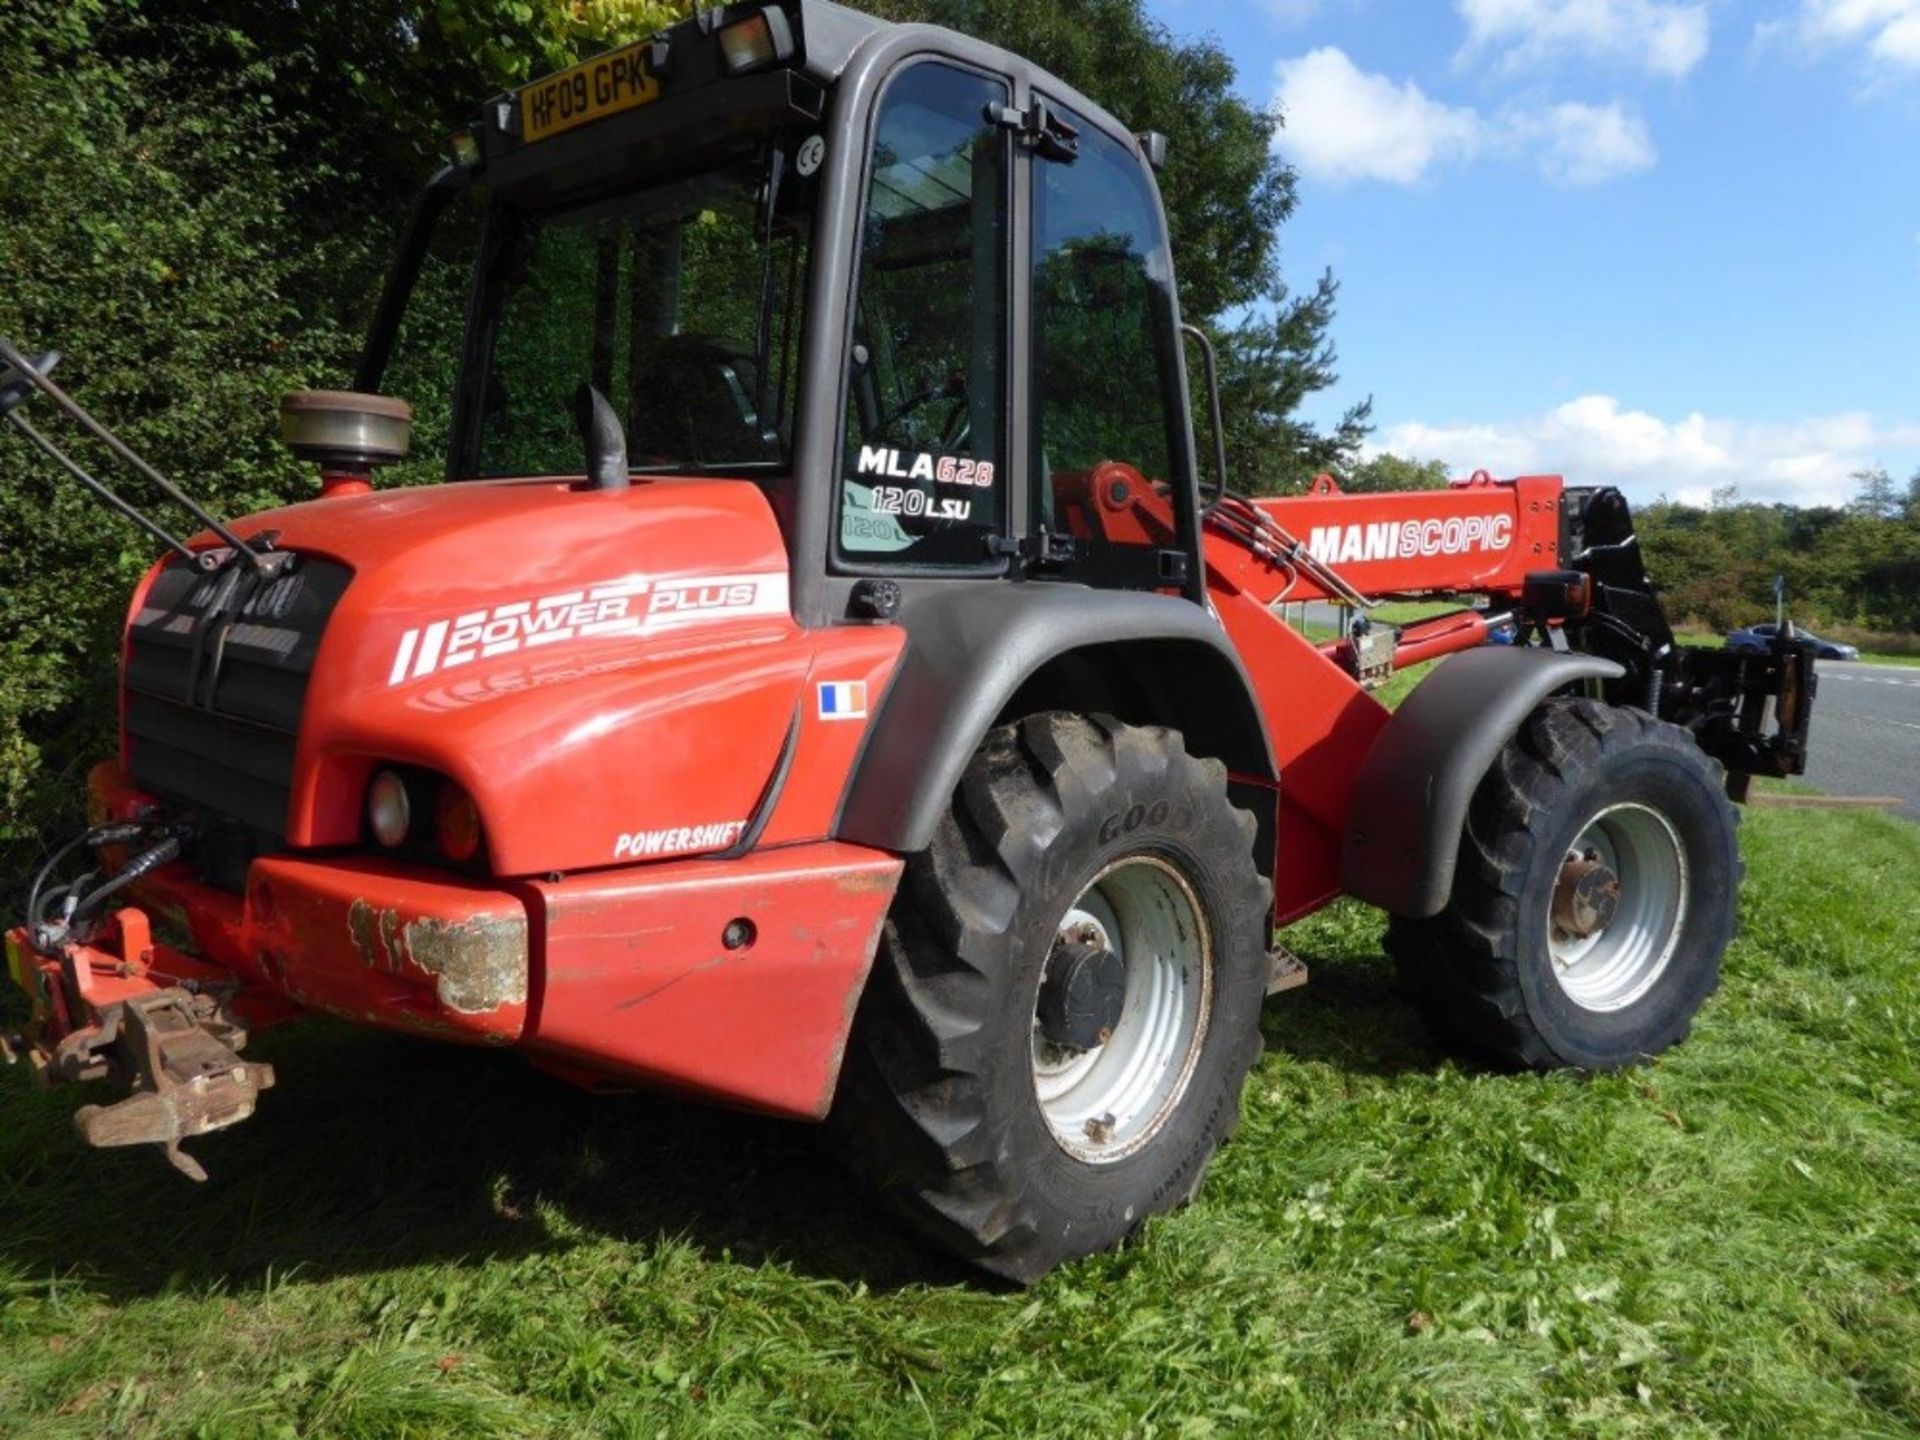 2009 Manitou Maniscopic MLA 628 LSU CRC Powershift, with Pallet Forks, one owner from new - Image 5 of 6